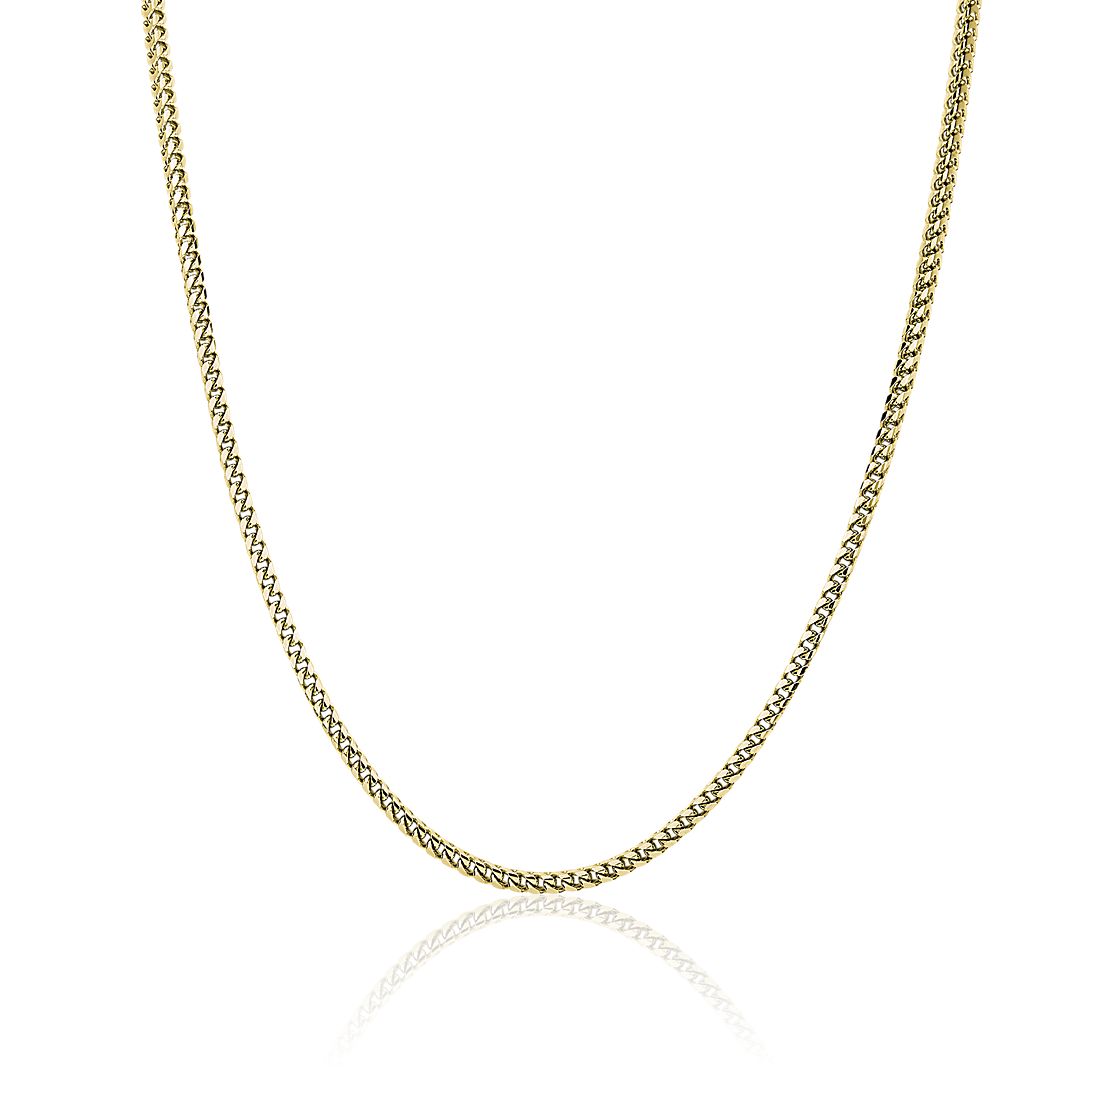 20" Men's Franco Chain Necklace in Solid 14k Yellow Gold (2.4 mm)